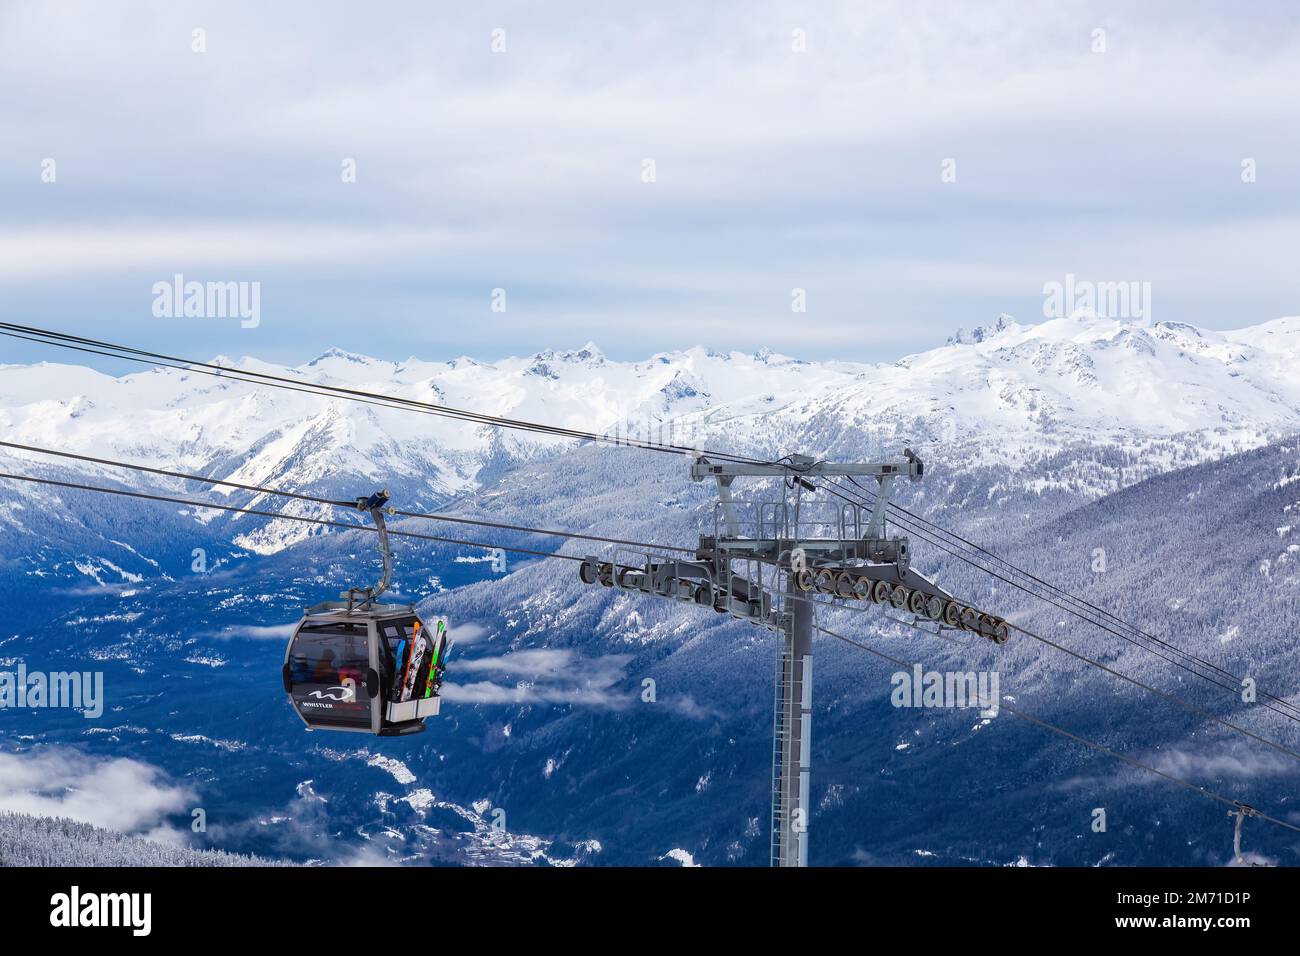 View of the Gondola going up the Mountain with Canadian Mountain Landscape Stock Photo